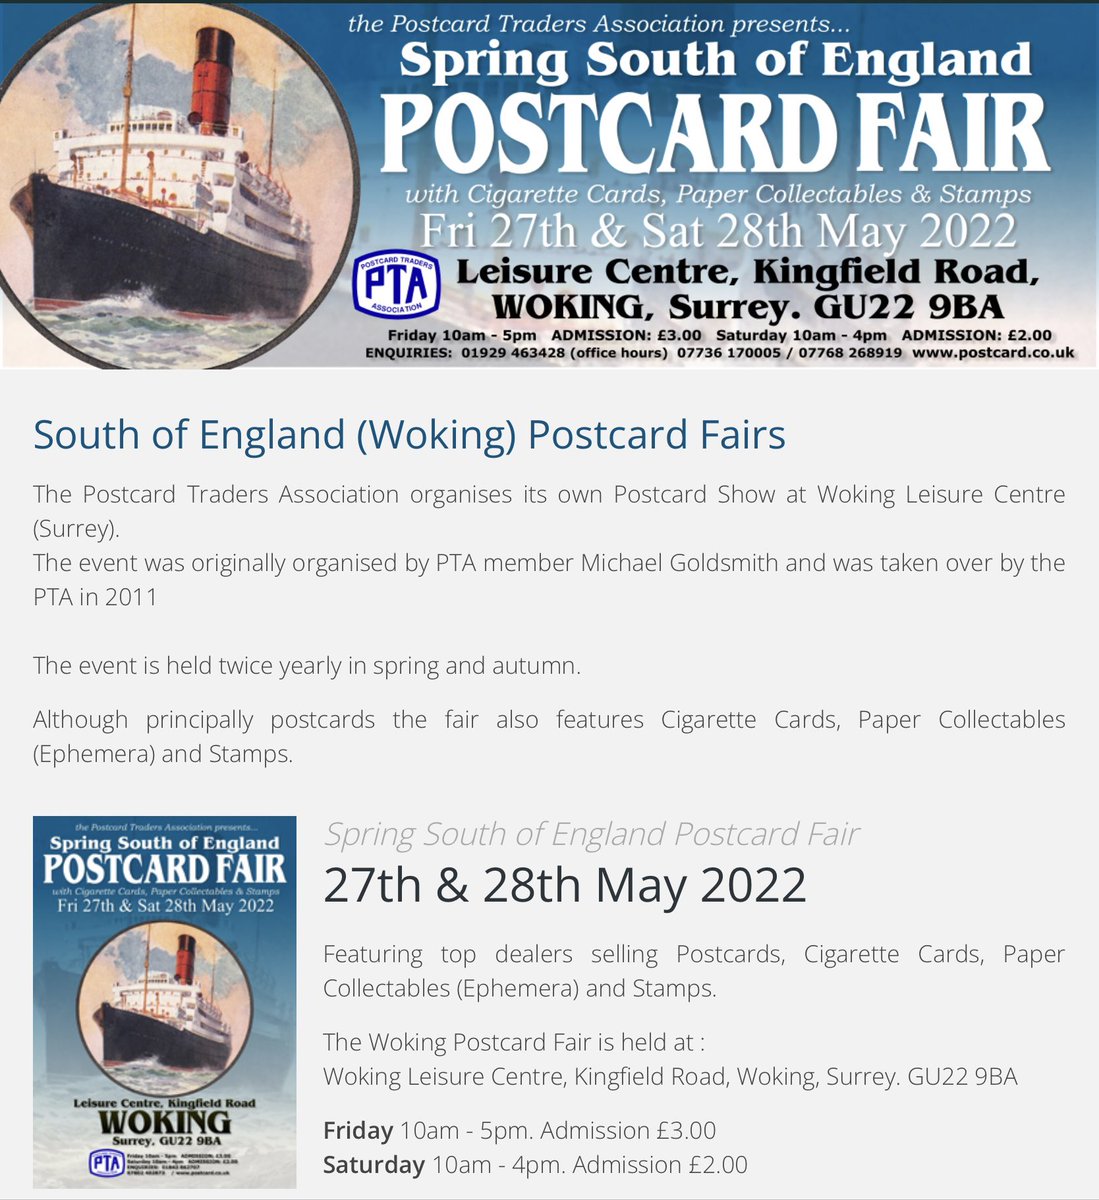 Just a reminder for all you #postcard enthusiasts or those who might be tempted! that it’s the big Woking fair this week. It has a great range of dealers and everything starting from 20p bargains Fast and frequent trains from Waterloo, I’ll be there on Friday.